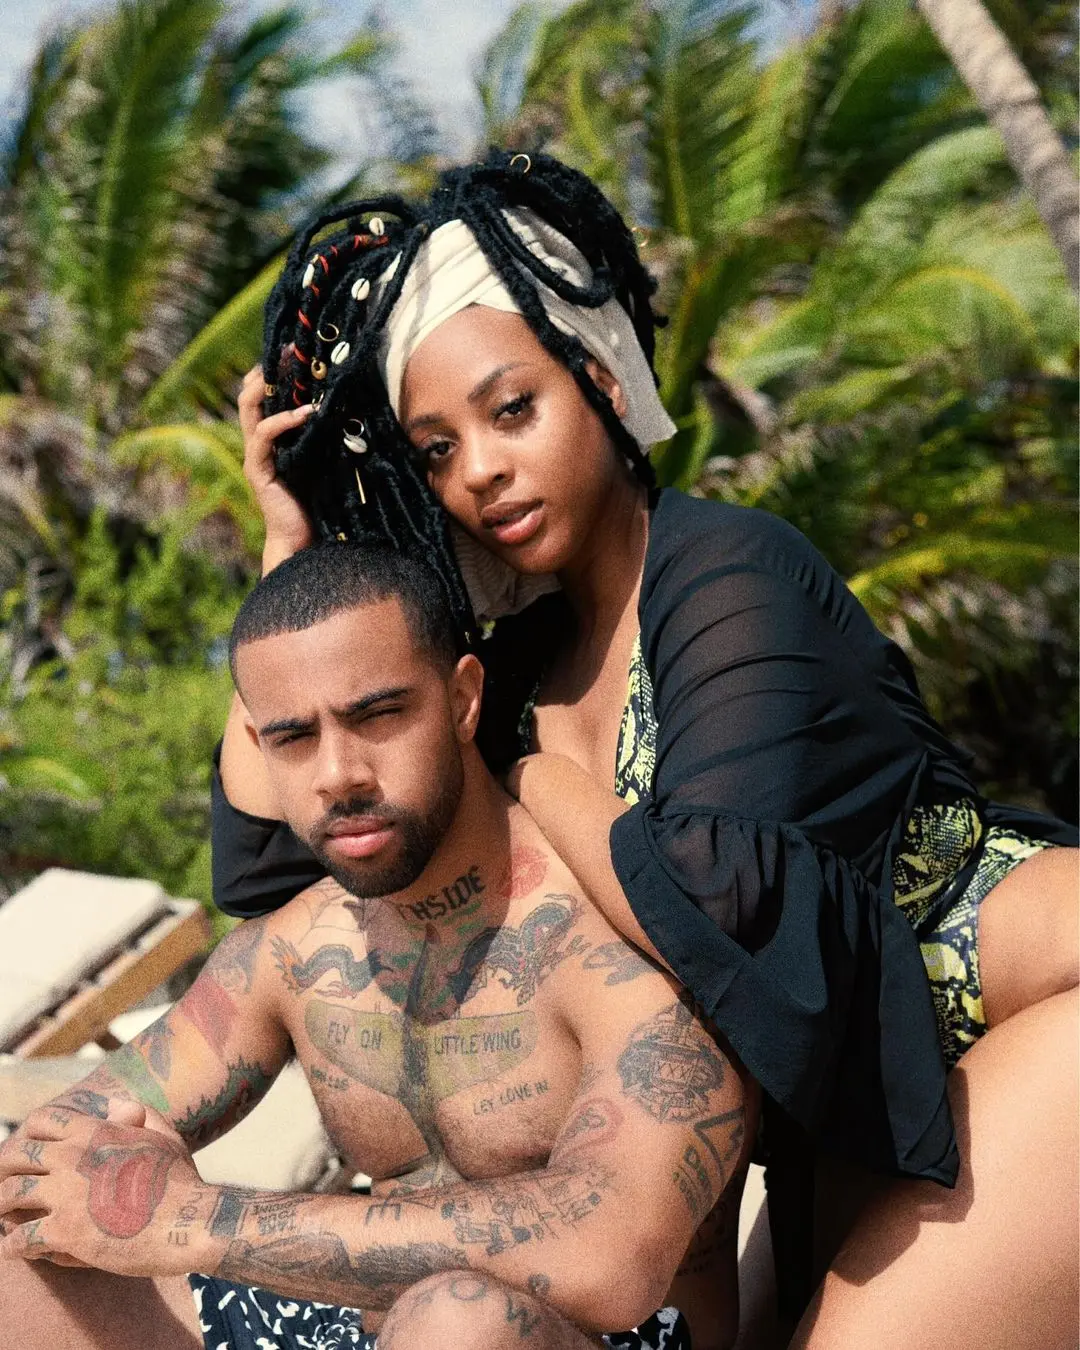 Nadia Nakai reveals why her relationship with Vic Mensa ended